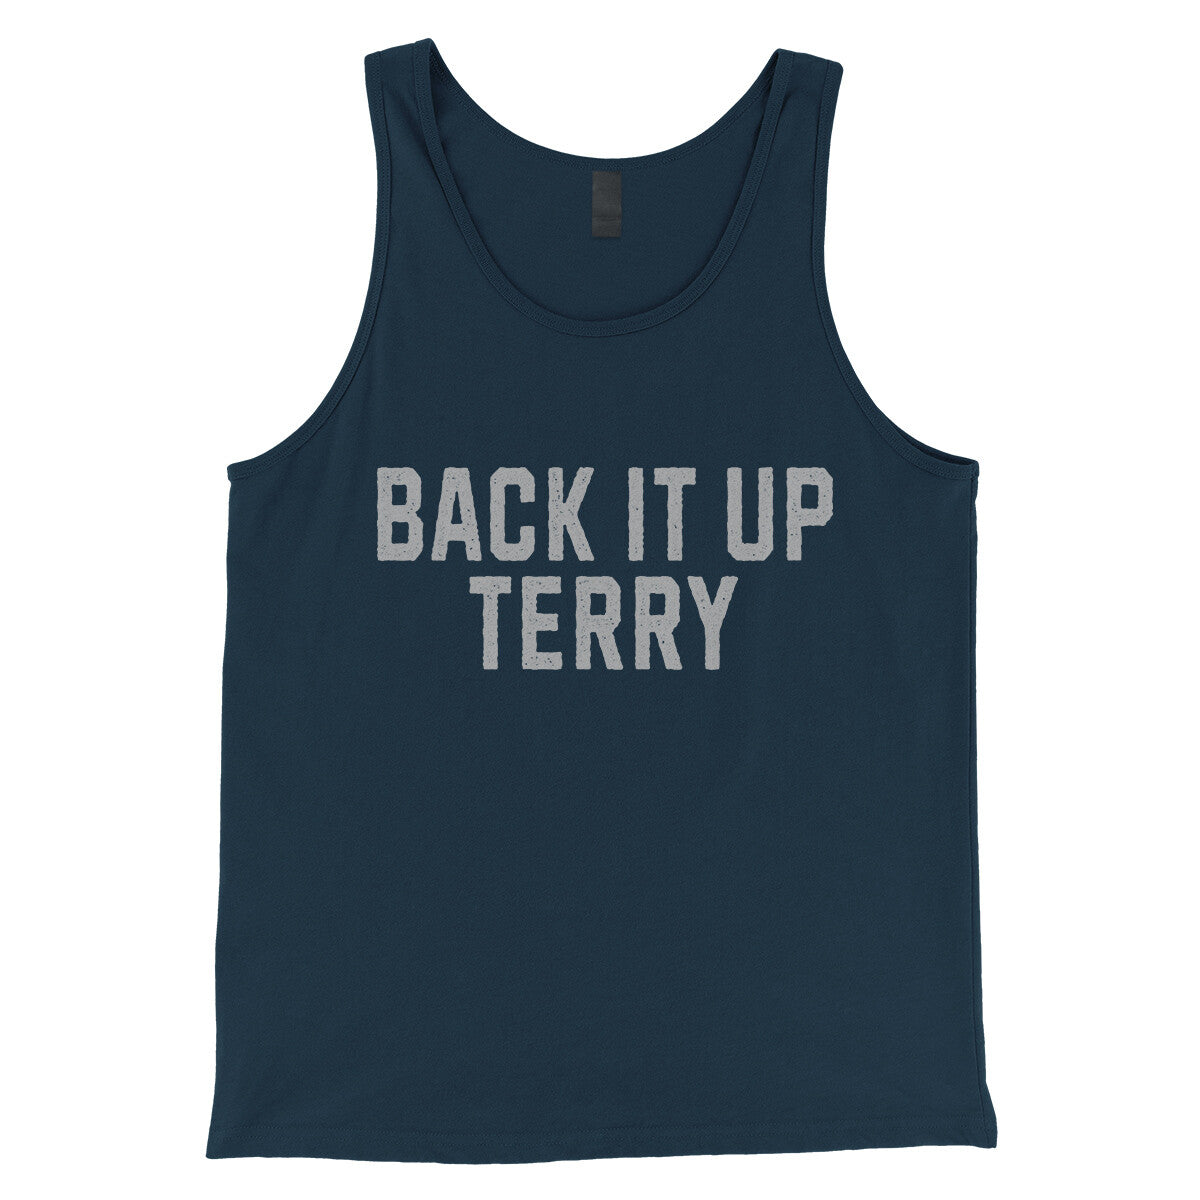 Back it up Terry in Navy Color